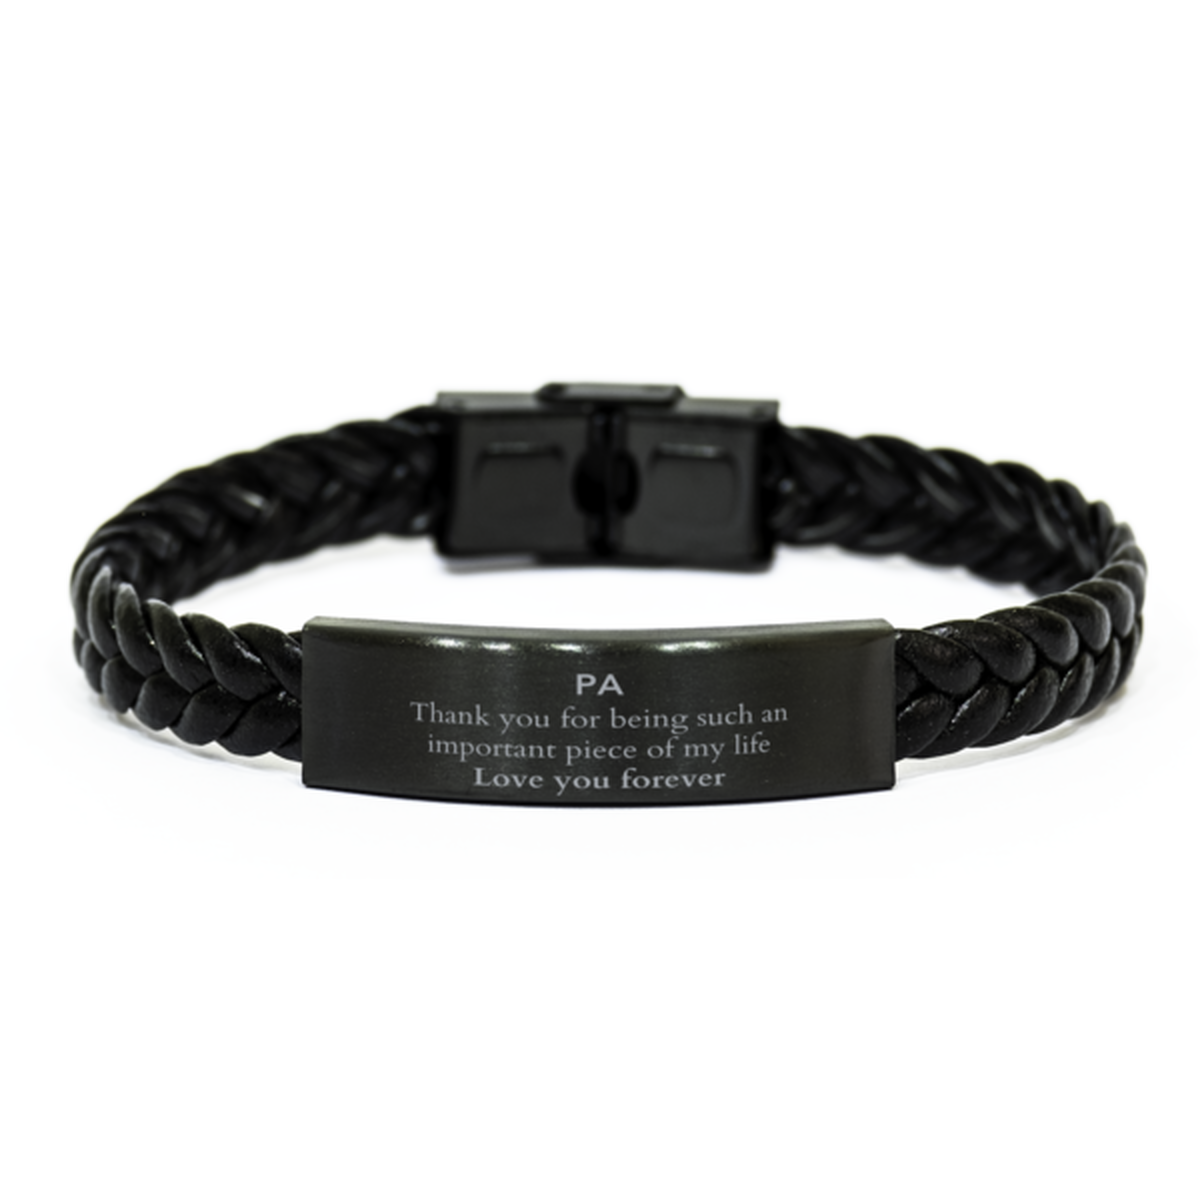 Appropriate Pa Braided Leather Bracelet Epic Birthday Gifts for Pa Thank you for being such an important piece of my life Pa Christmas Mothers Fathers Day